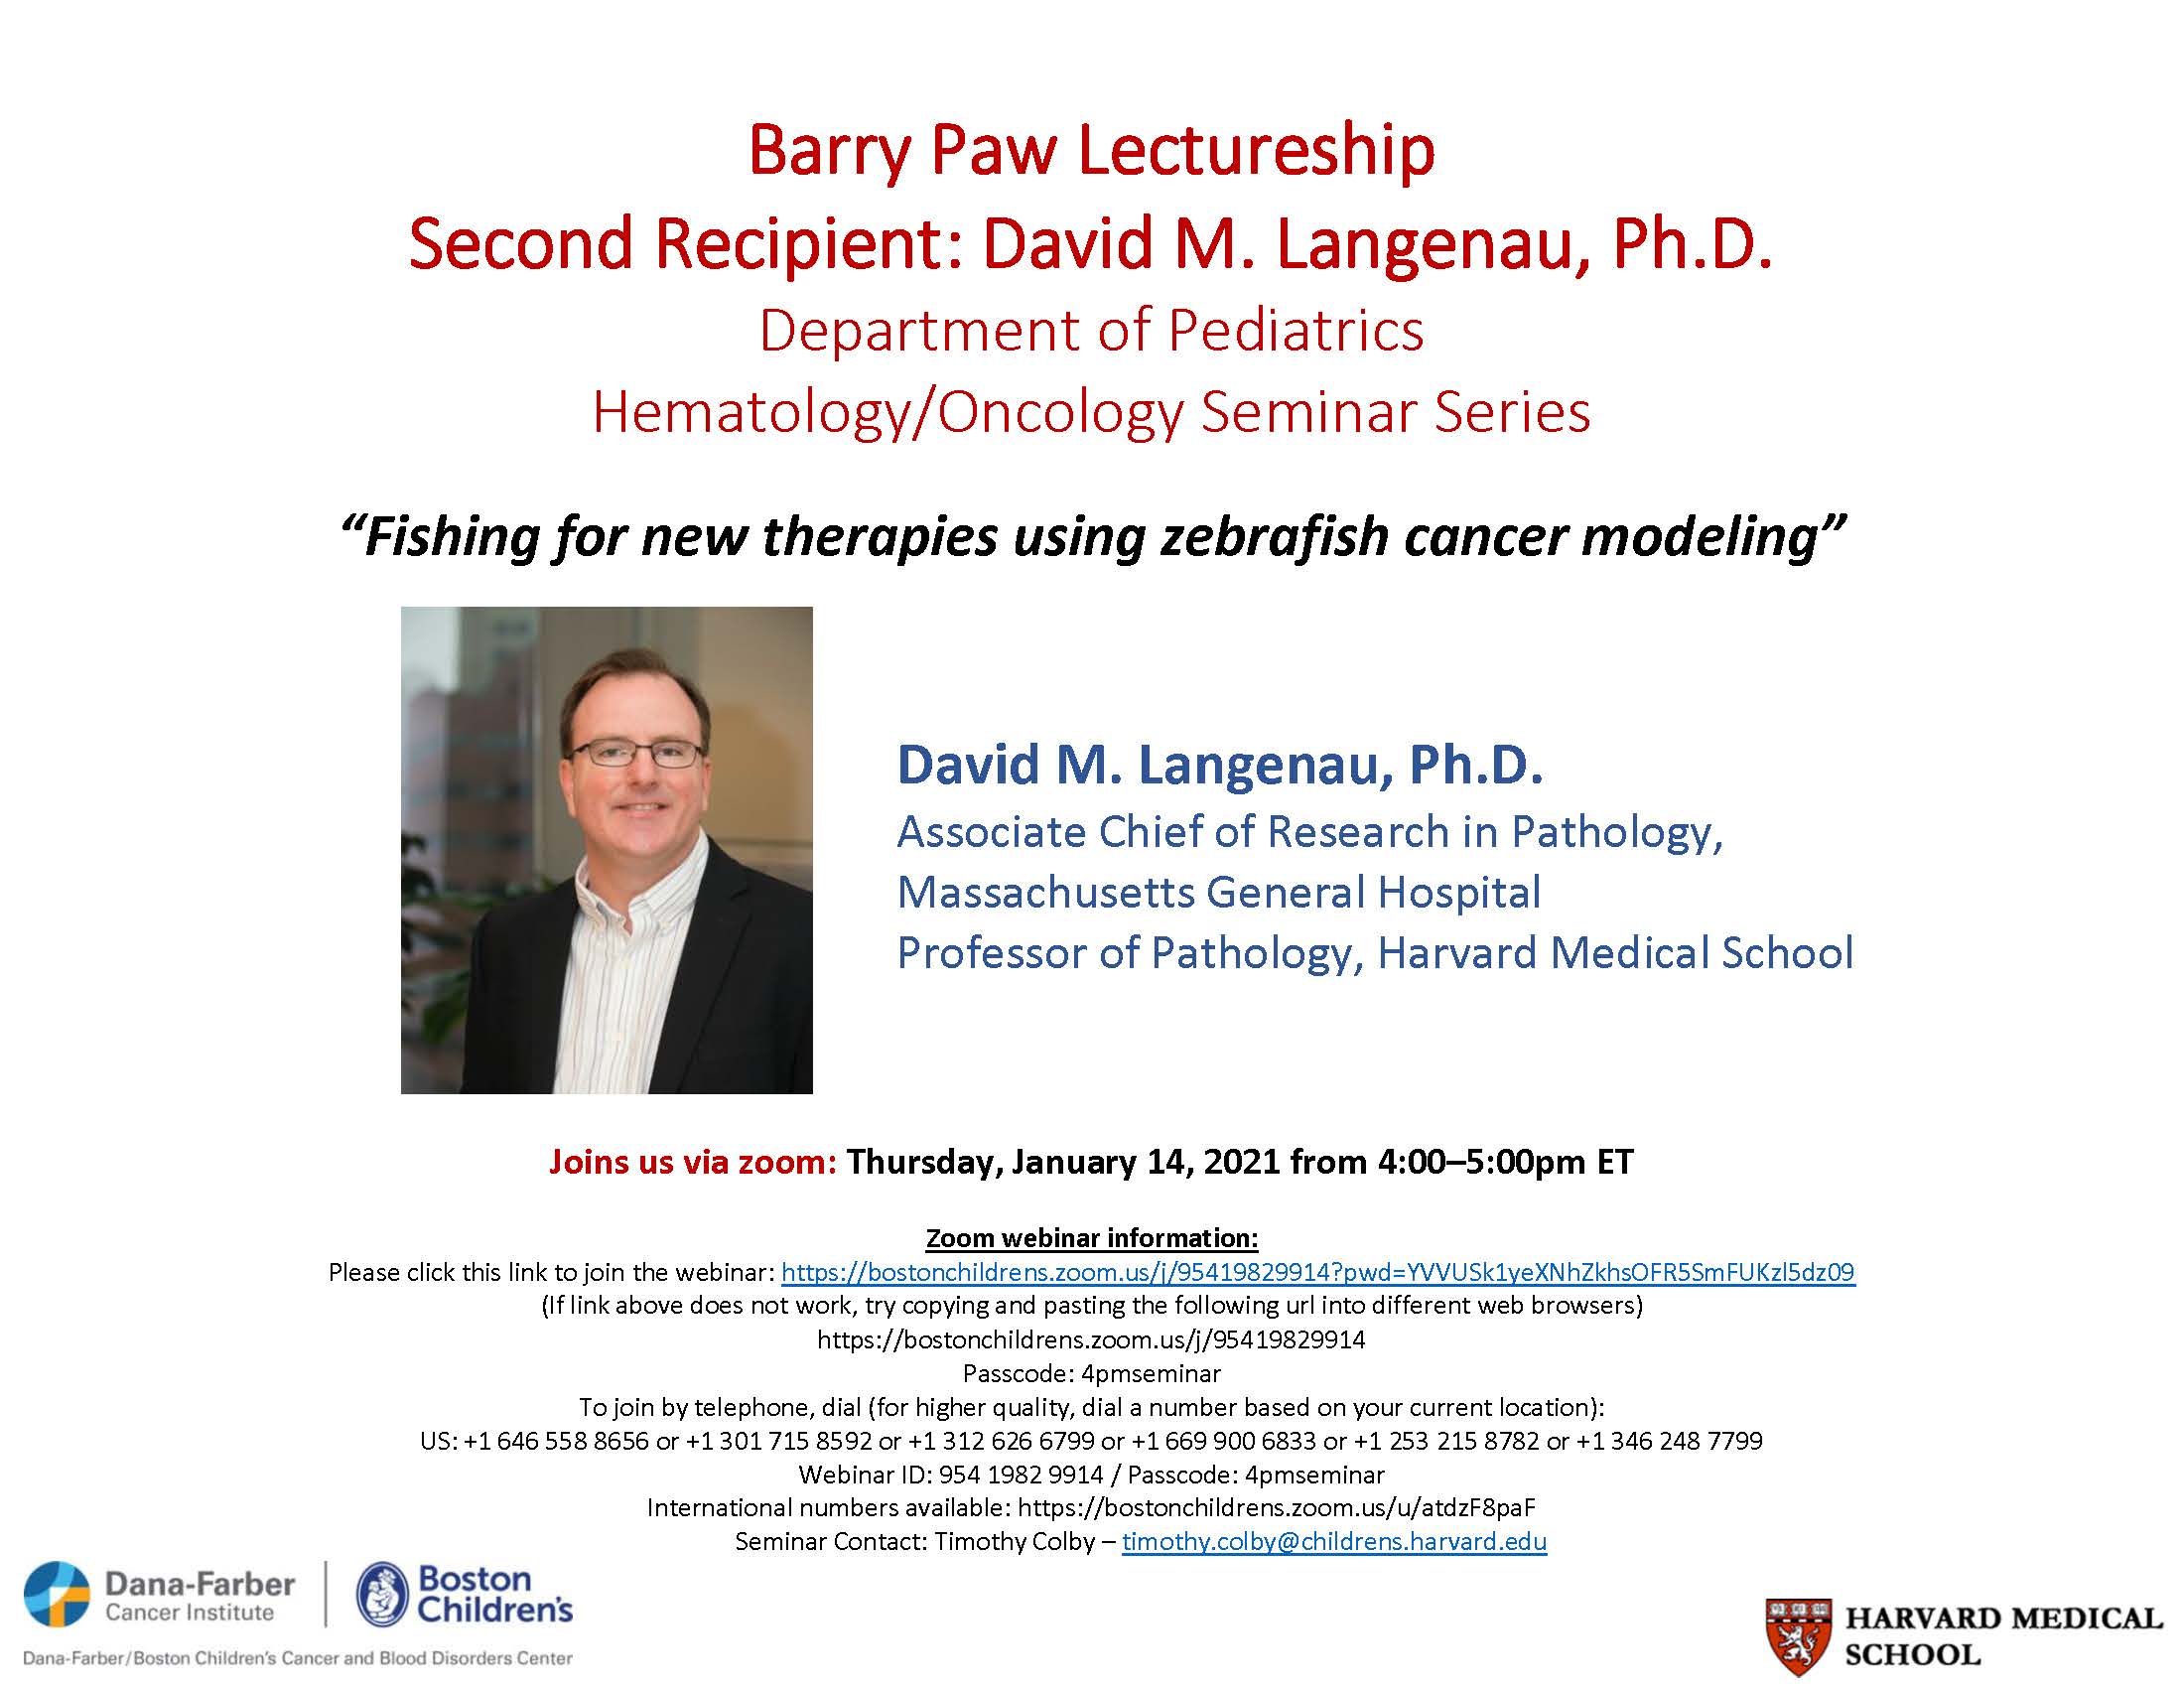 Barry Paw Lectureship